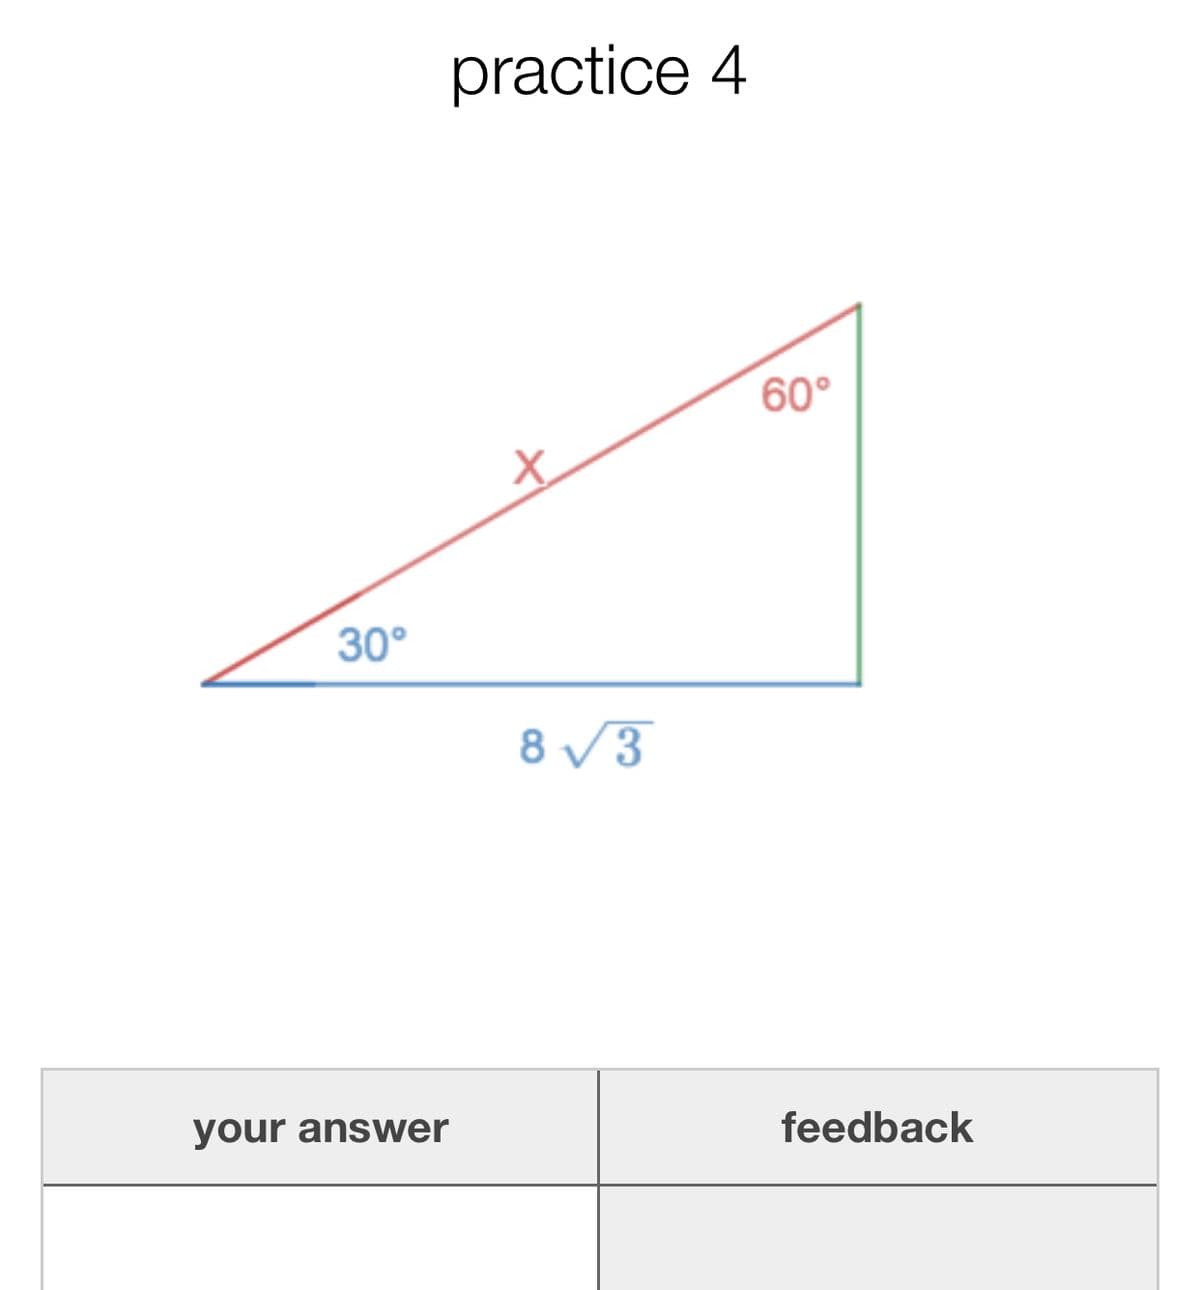 practice 4
60°
30°
8 /3
your answer
feedback
